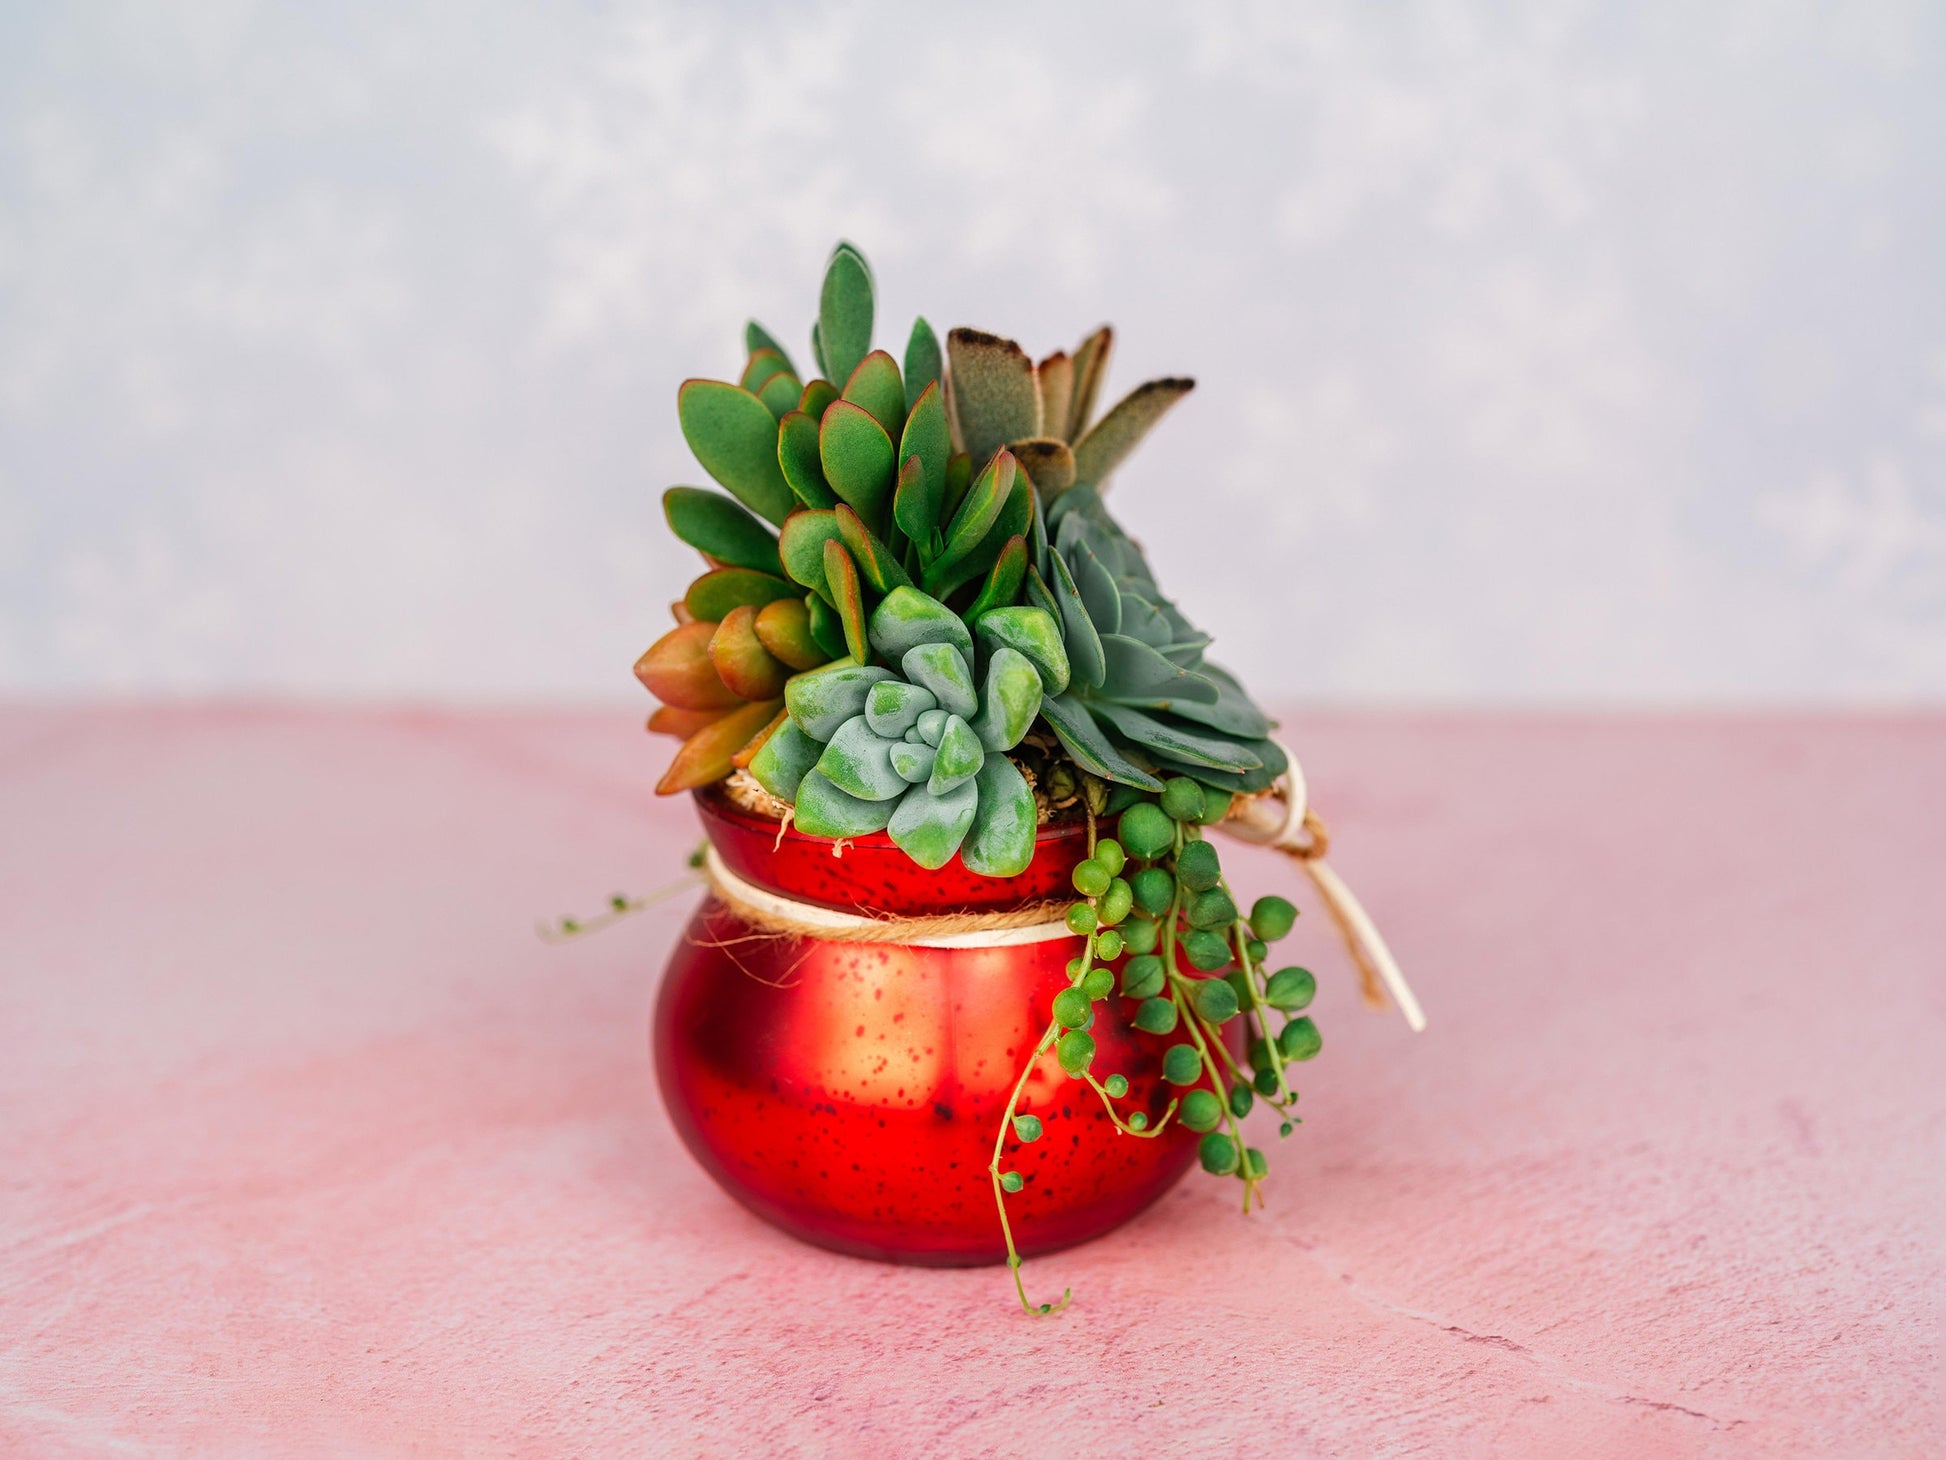 Red Mercury Glass Christmas Succulent Gift Arrangement with Rustic Wood Star- Small Gift or Holiday Decor Centerpiece